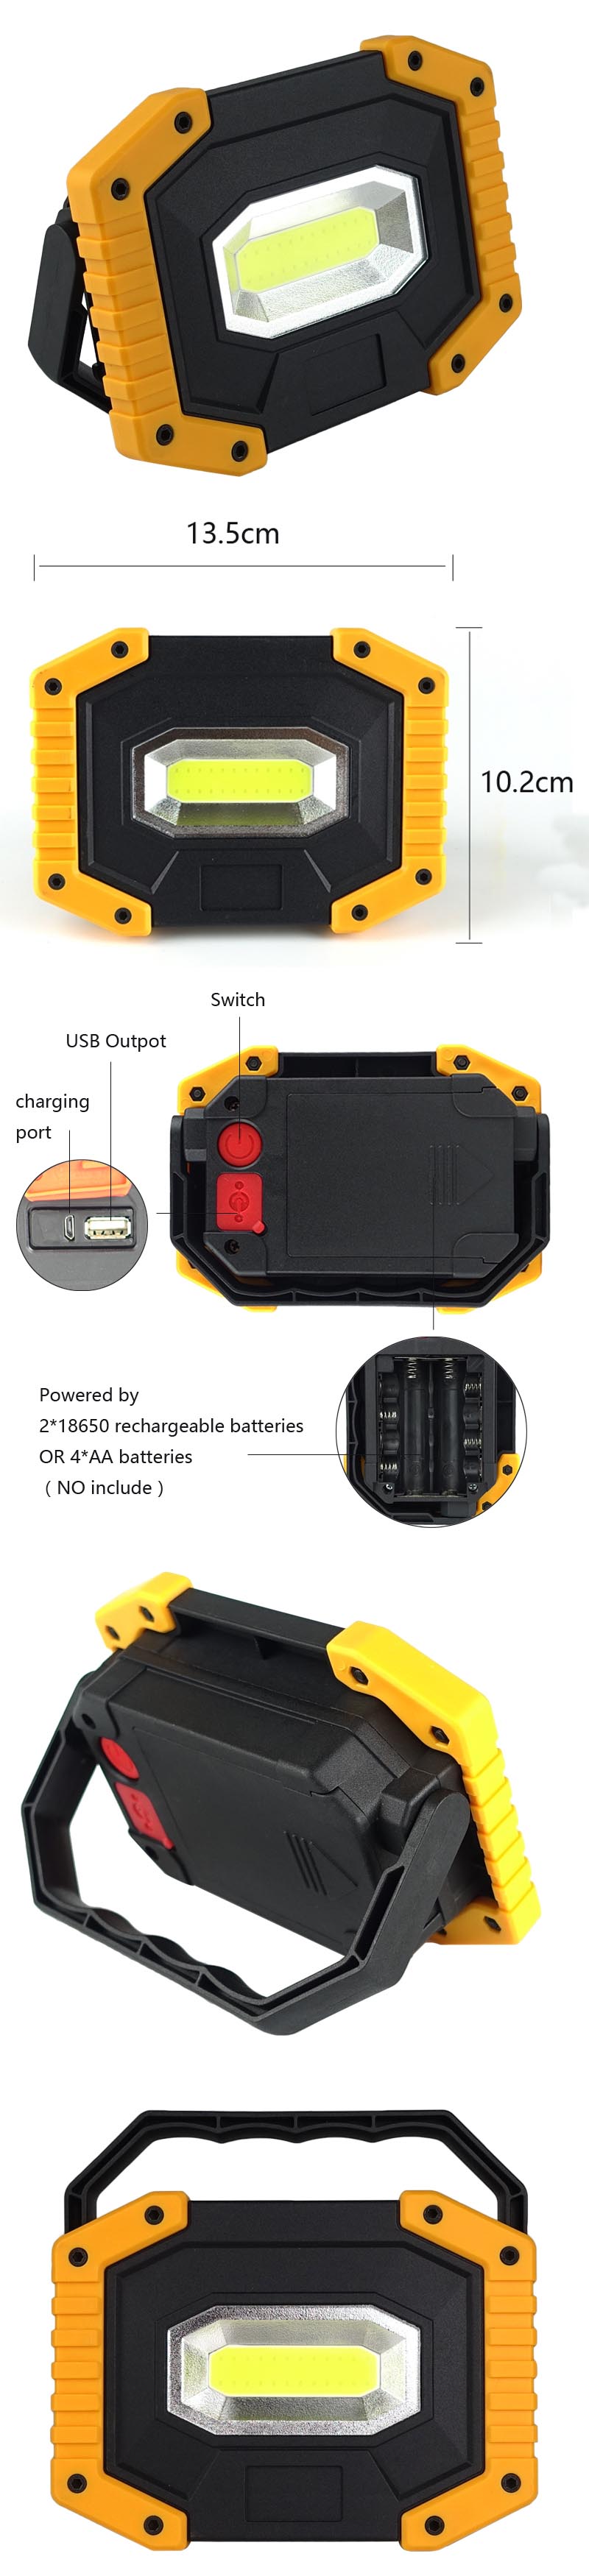 10W-COB-LED-750-1200LM-Portable-Rechargeable-Camping-Light-18650-Battery-Waterproof-Emergency-Flashl-1409809